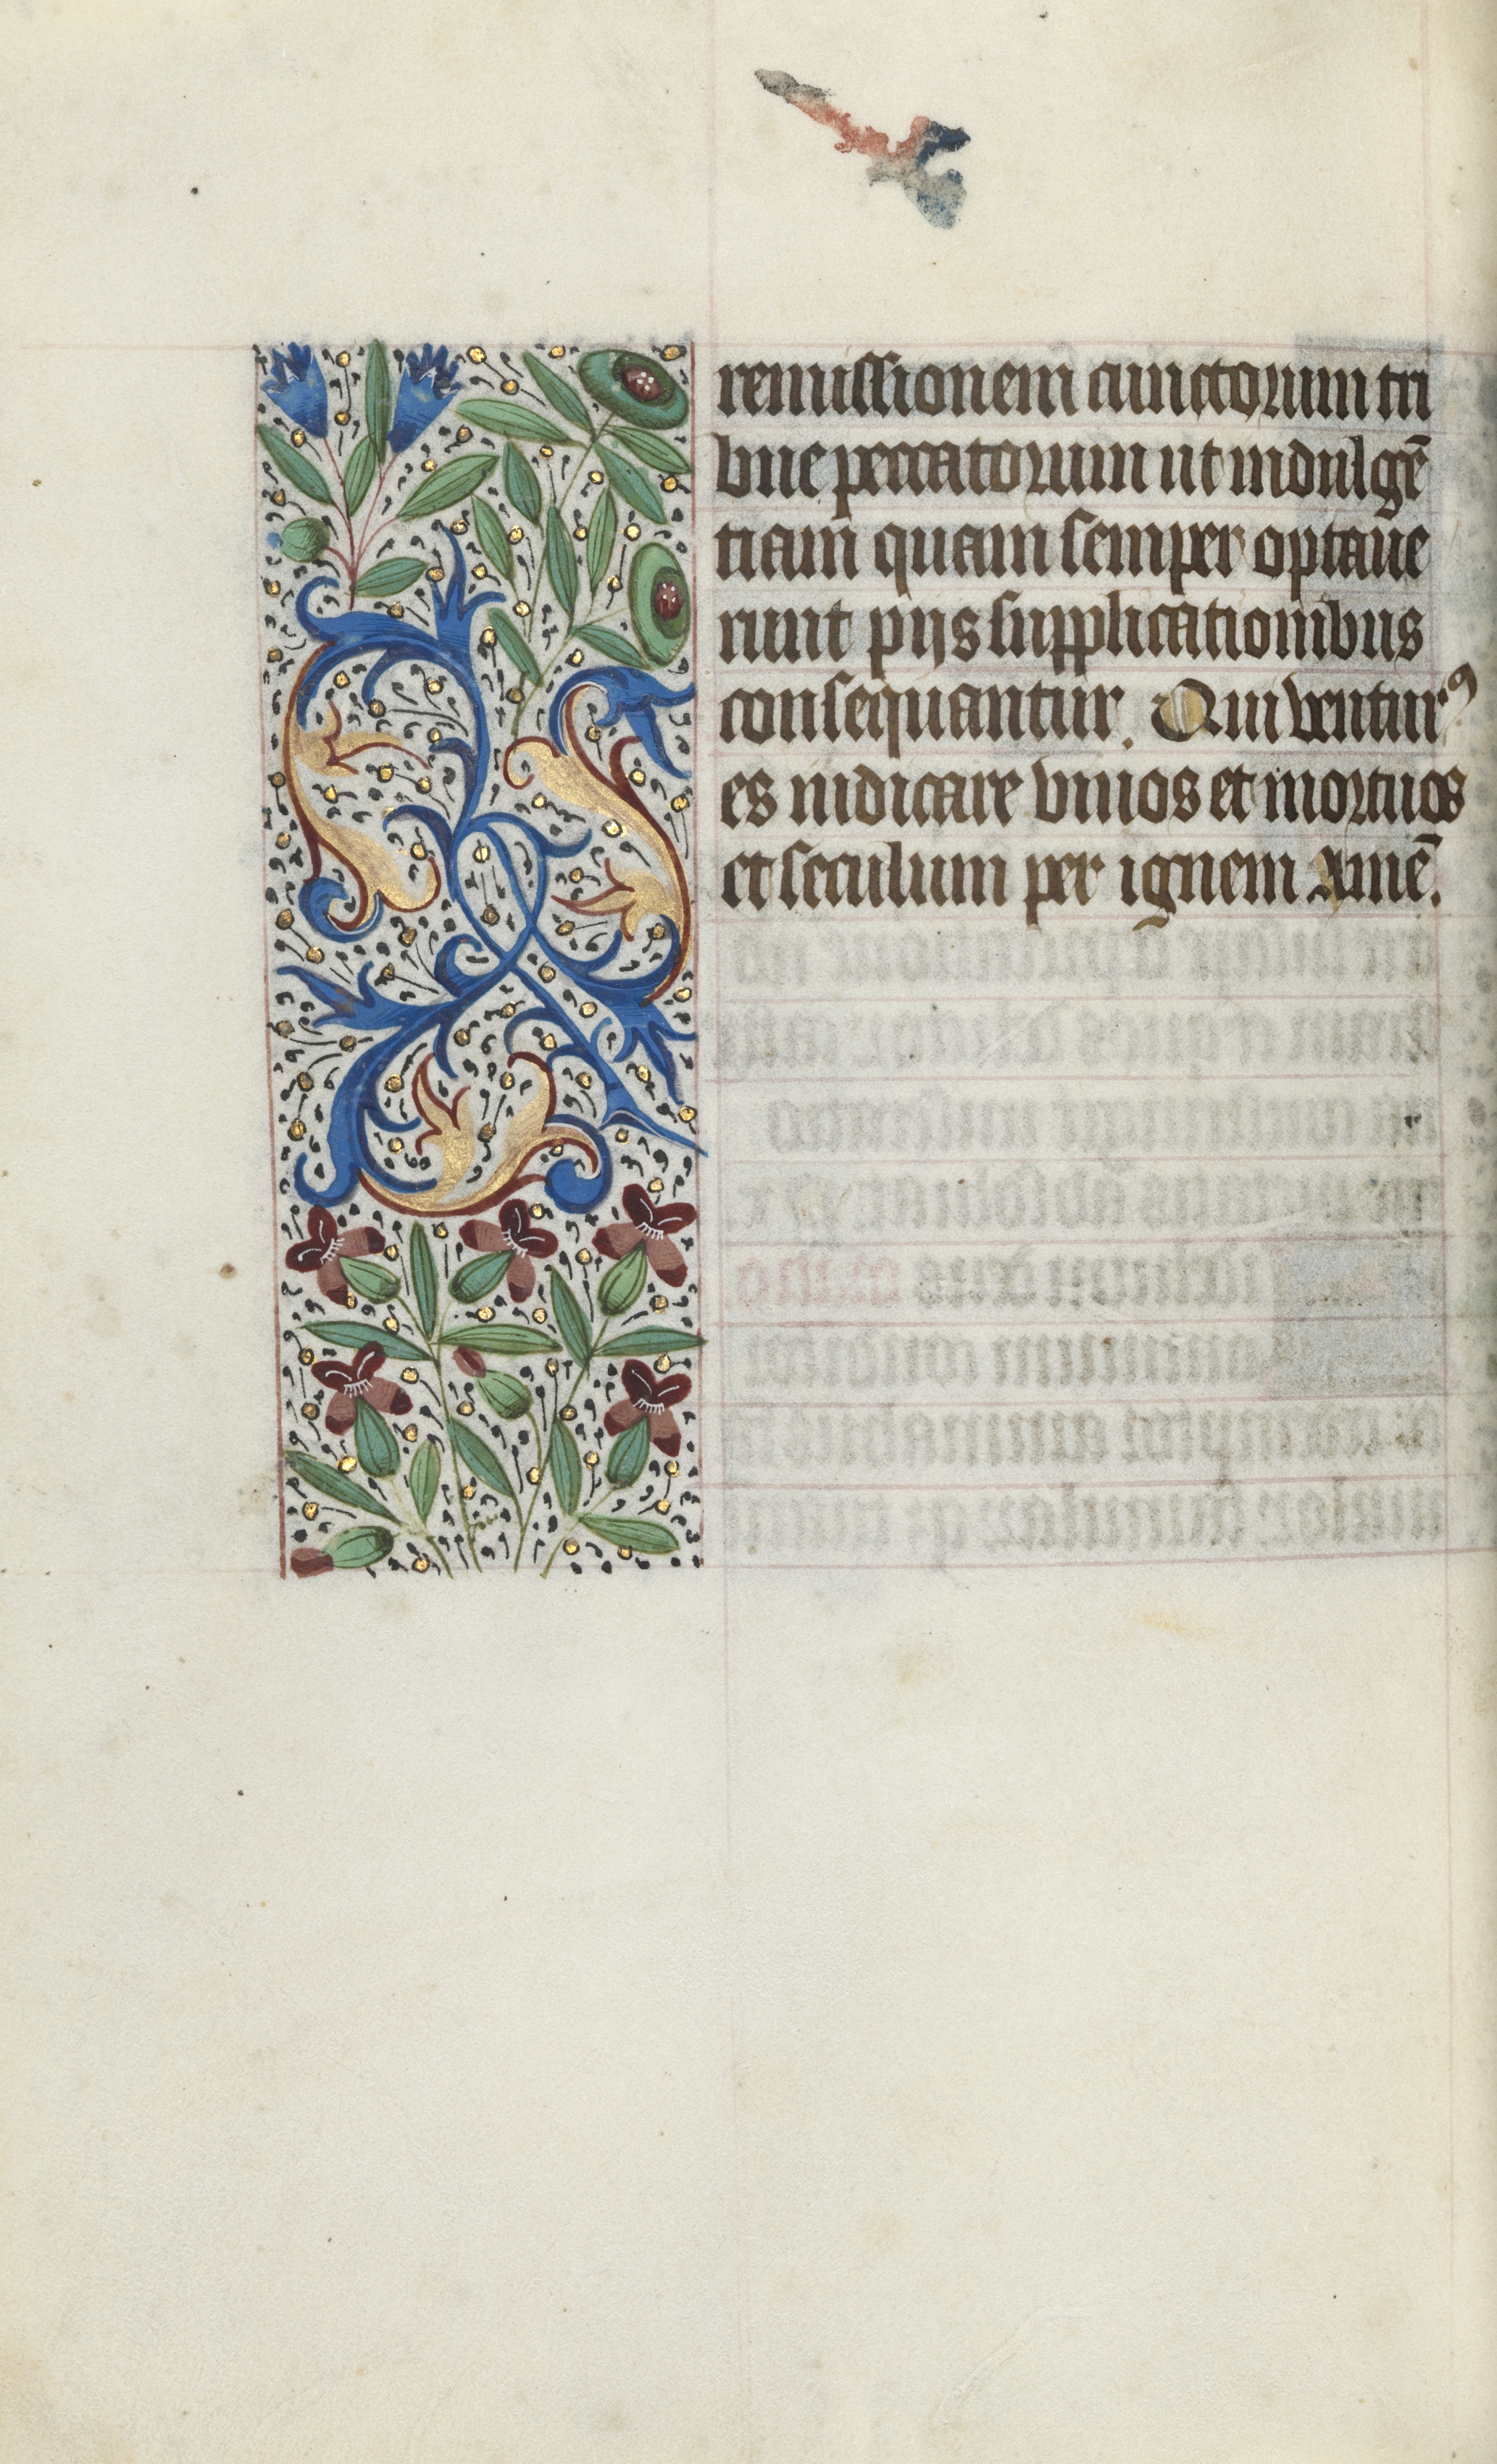 Book of Hours (Use of Rouen): fol. 96v